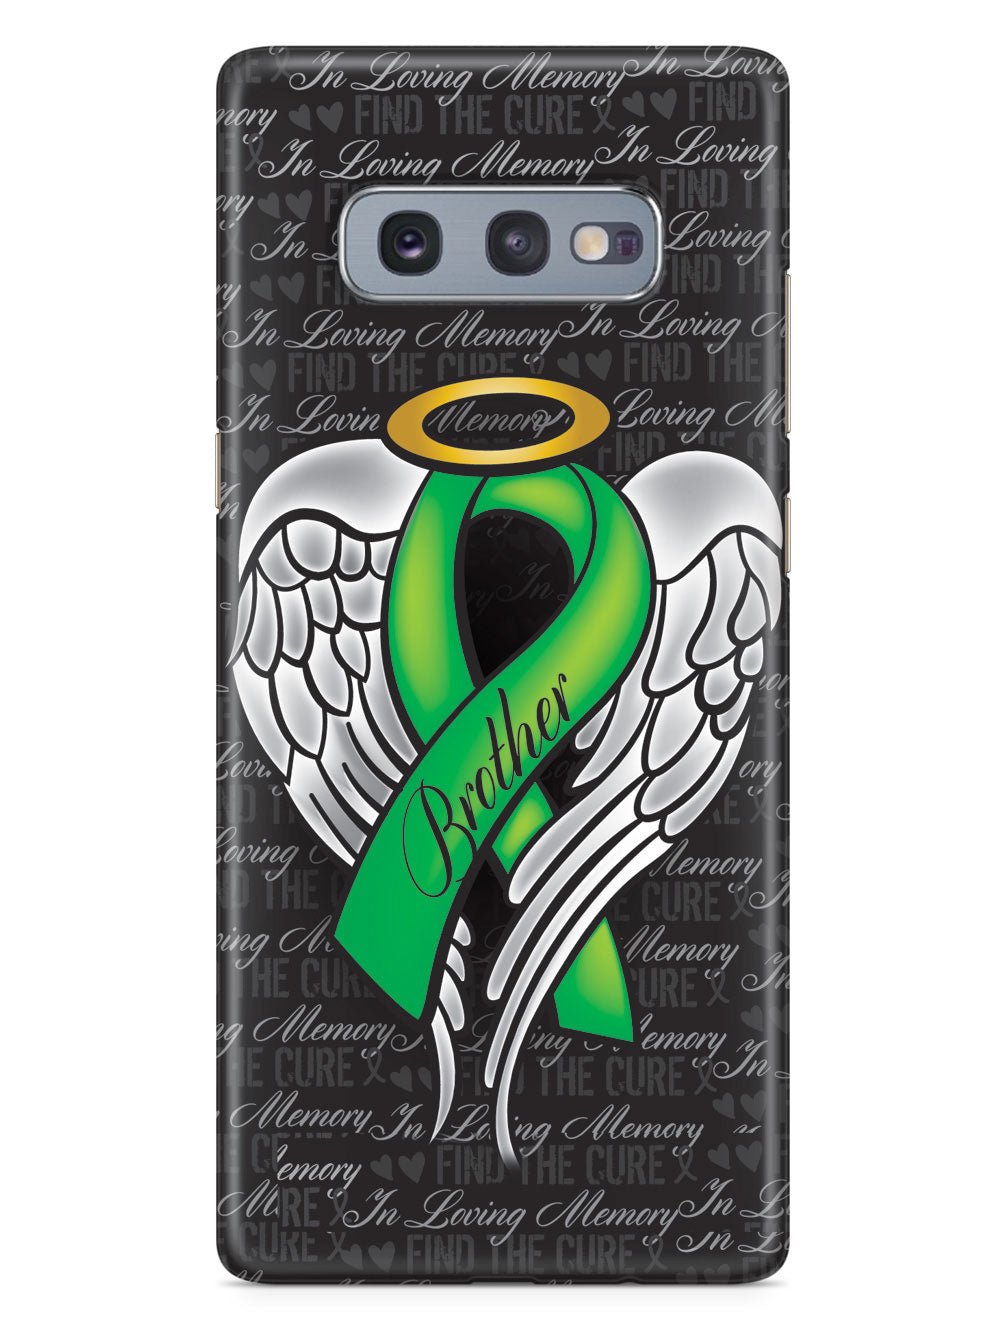 In Loving Memory of My Brother - Green Ribbon Case